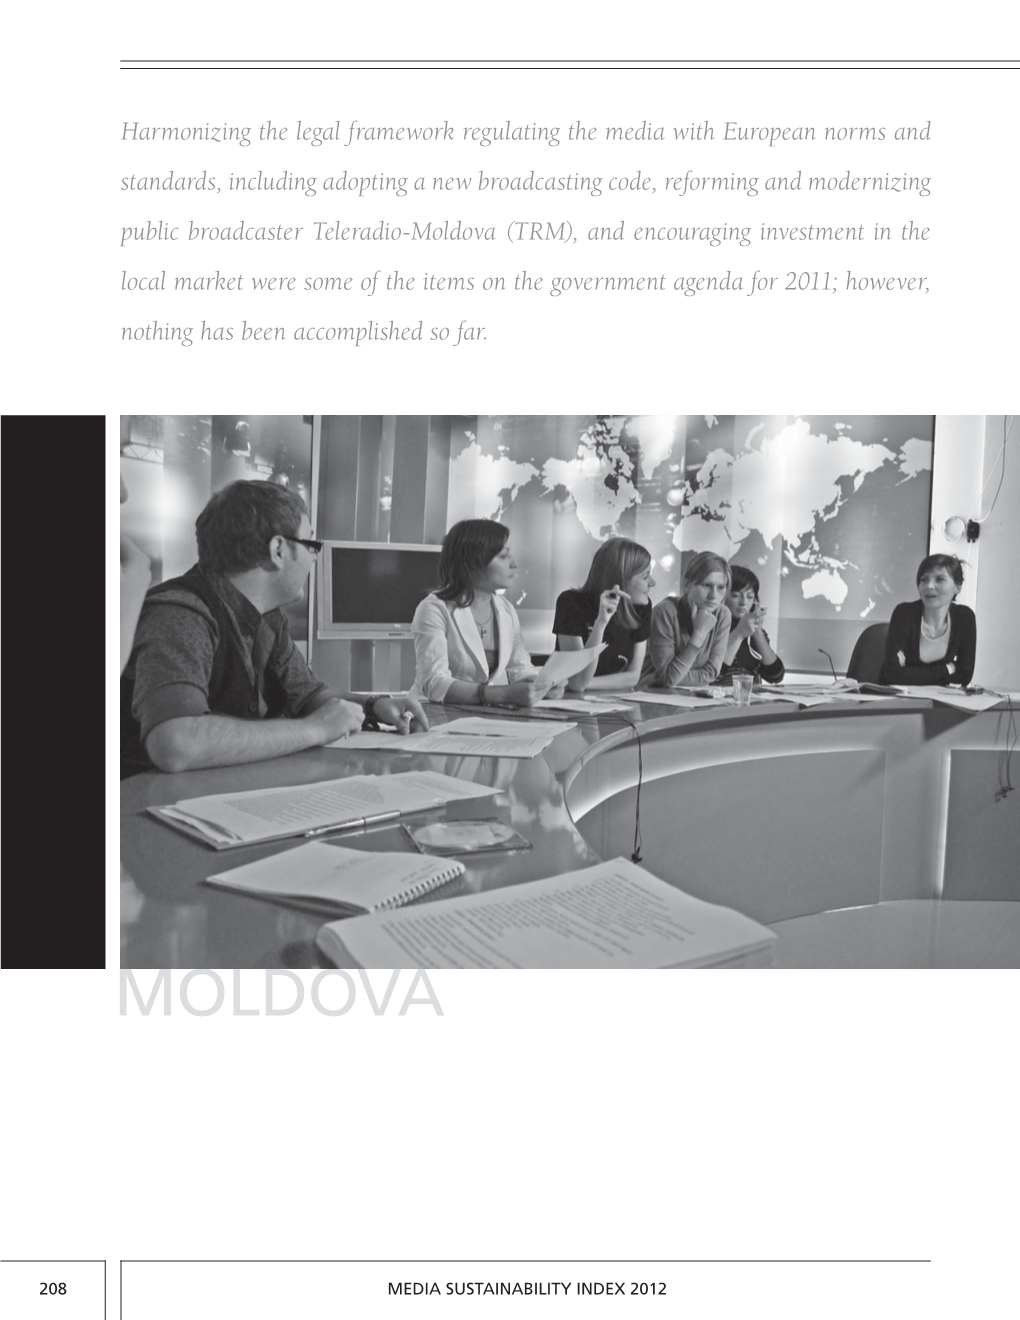 Moldova (TRM), and Encouraging Investment in the Local Market Were Some of the Items on the Government Agenda for 2011; However, Nothing Has Been Accomplished So Far